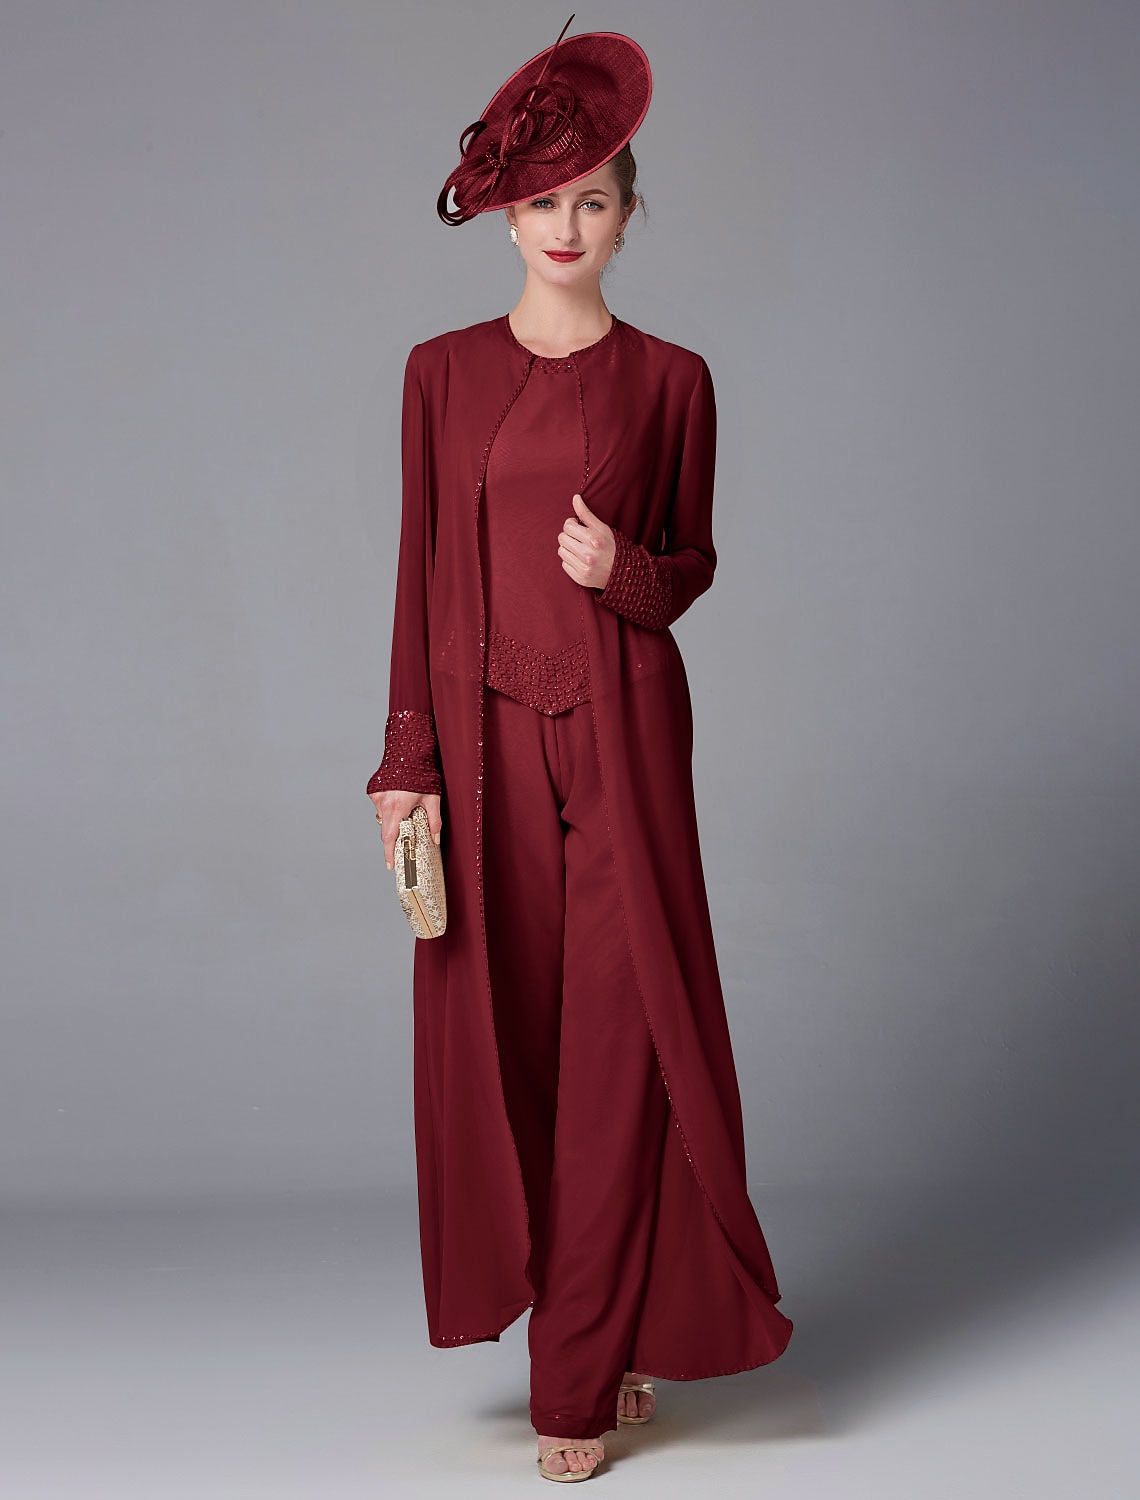 Plus Size Muslim Formal Palazzo Pants Outfit With Appliqued Jumpsuit, Long  Sleeves, Bateau Neckline, And Satin Perfect For Evening Events And Proms  From Weddingteam, $114.6